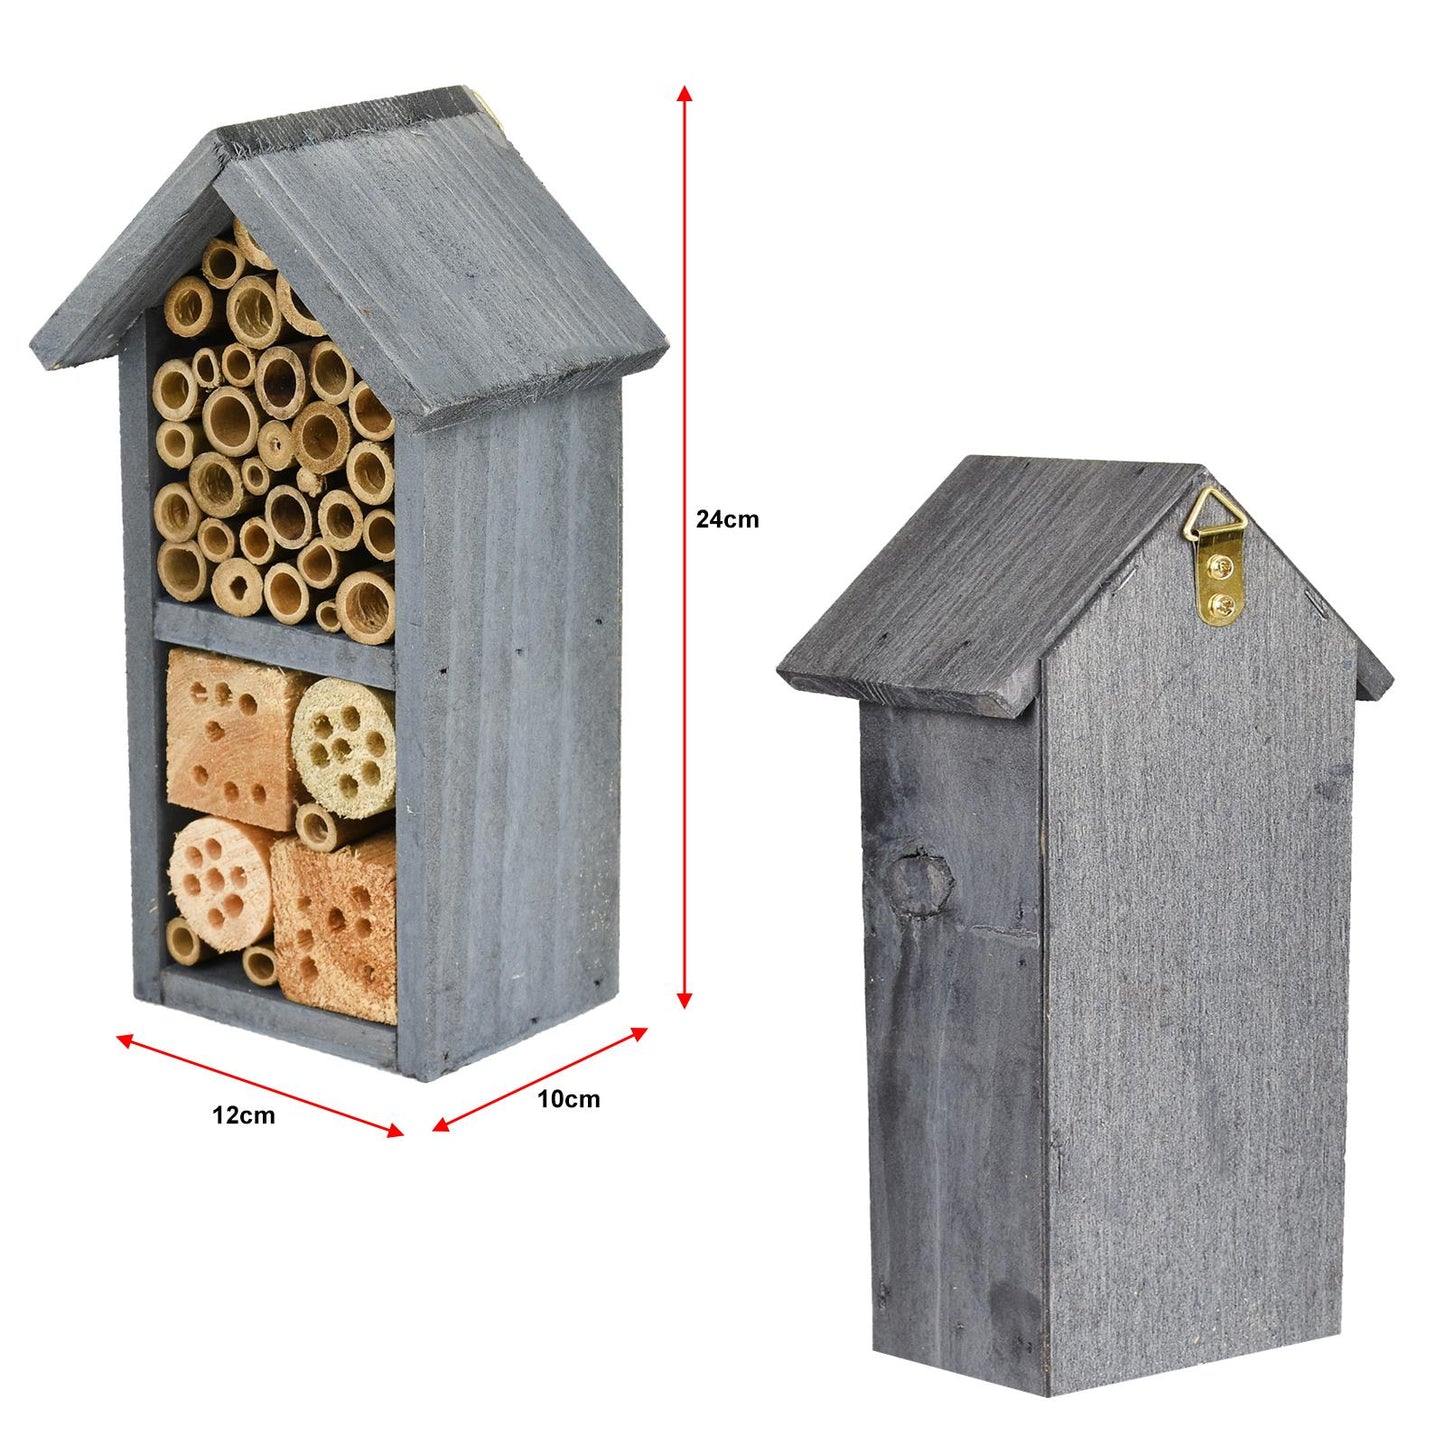 Handmade Insect Habitat for Bees, Butterflies, and Ladybugs